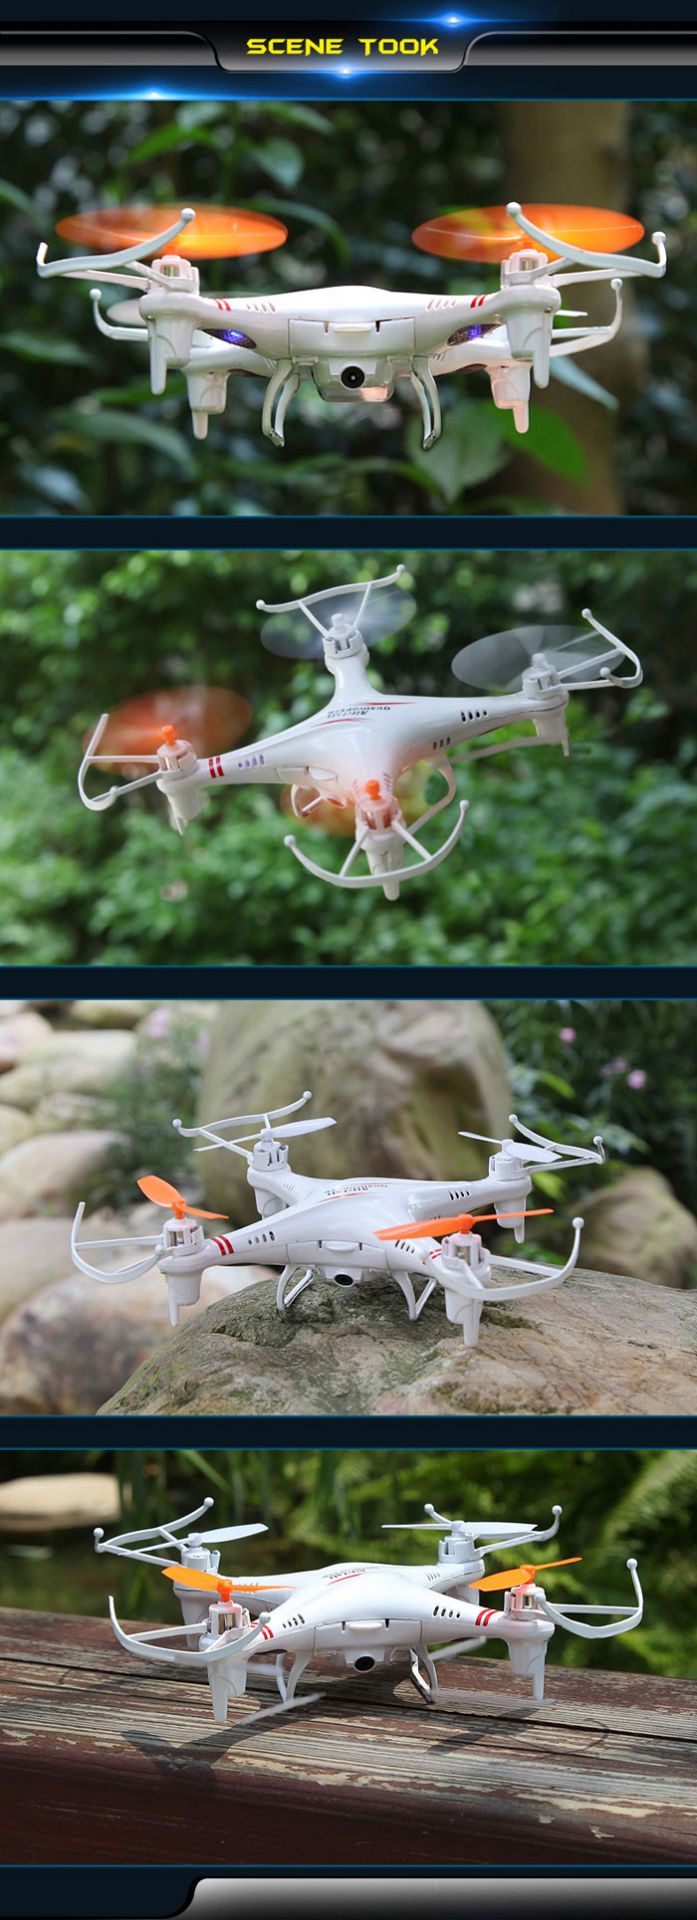 SKYTEC RC QUADCOPTER 4 CHANNEL 6 AXIS 2.4Ghz BNIB BRAND NEW IN BOX Control Helicopters, also refered - Image 2 of 6